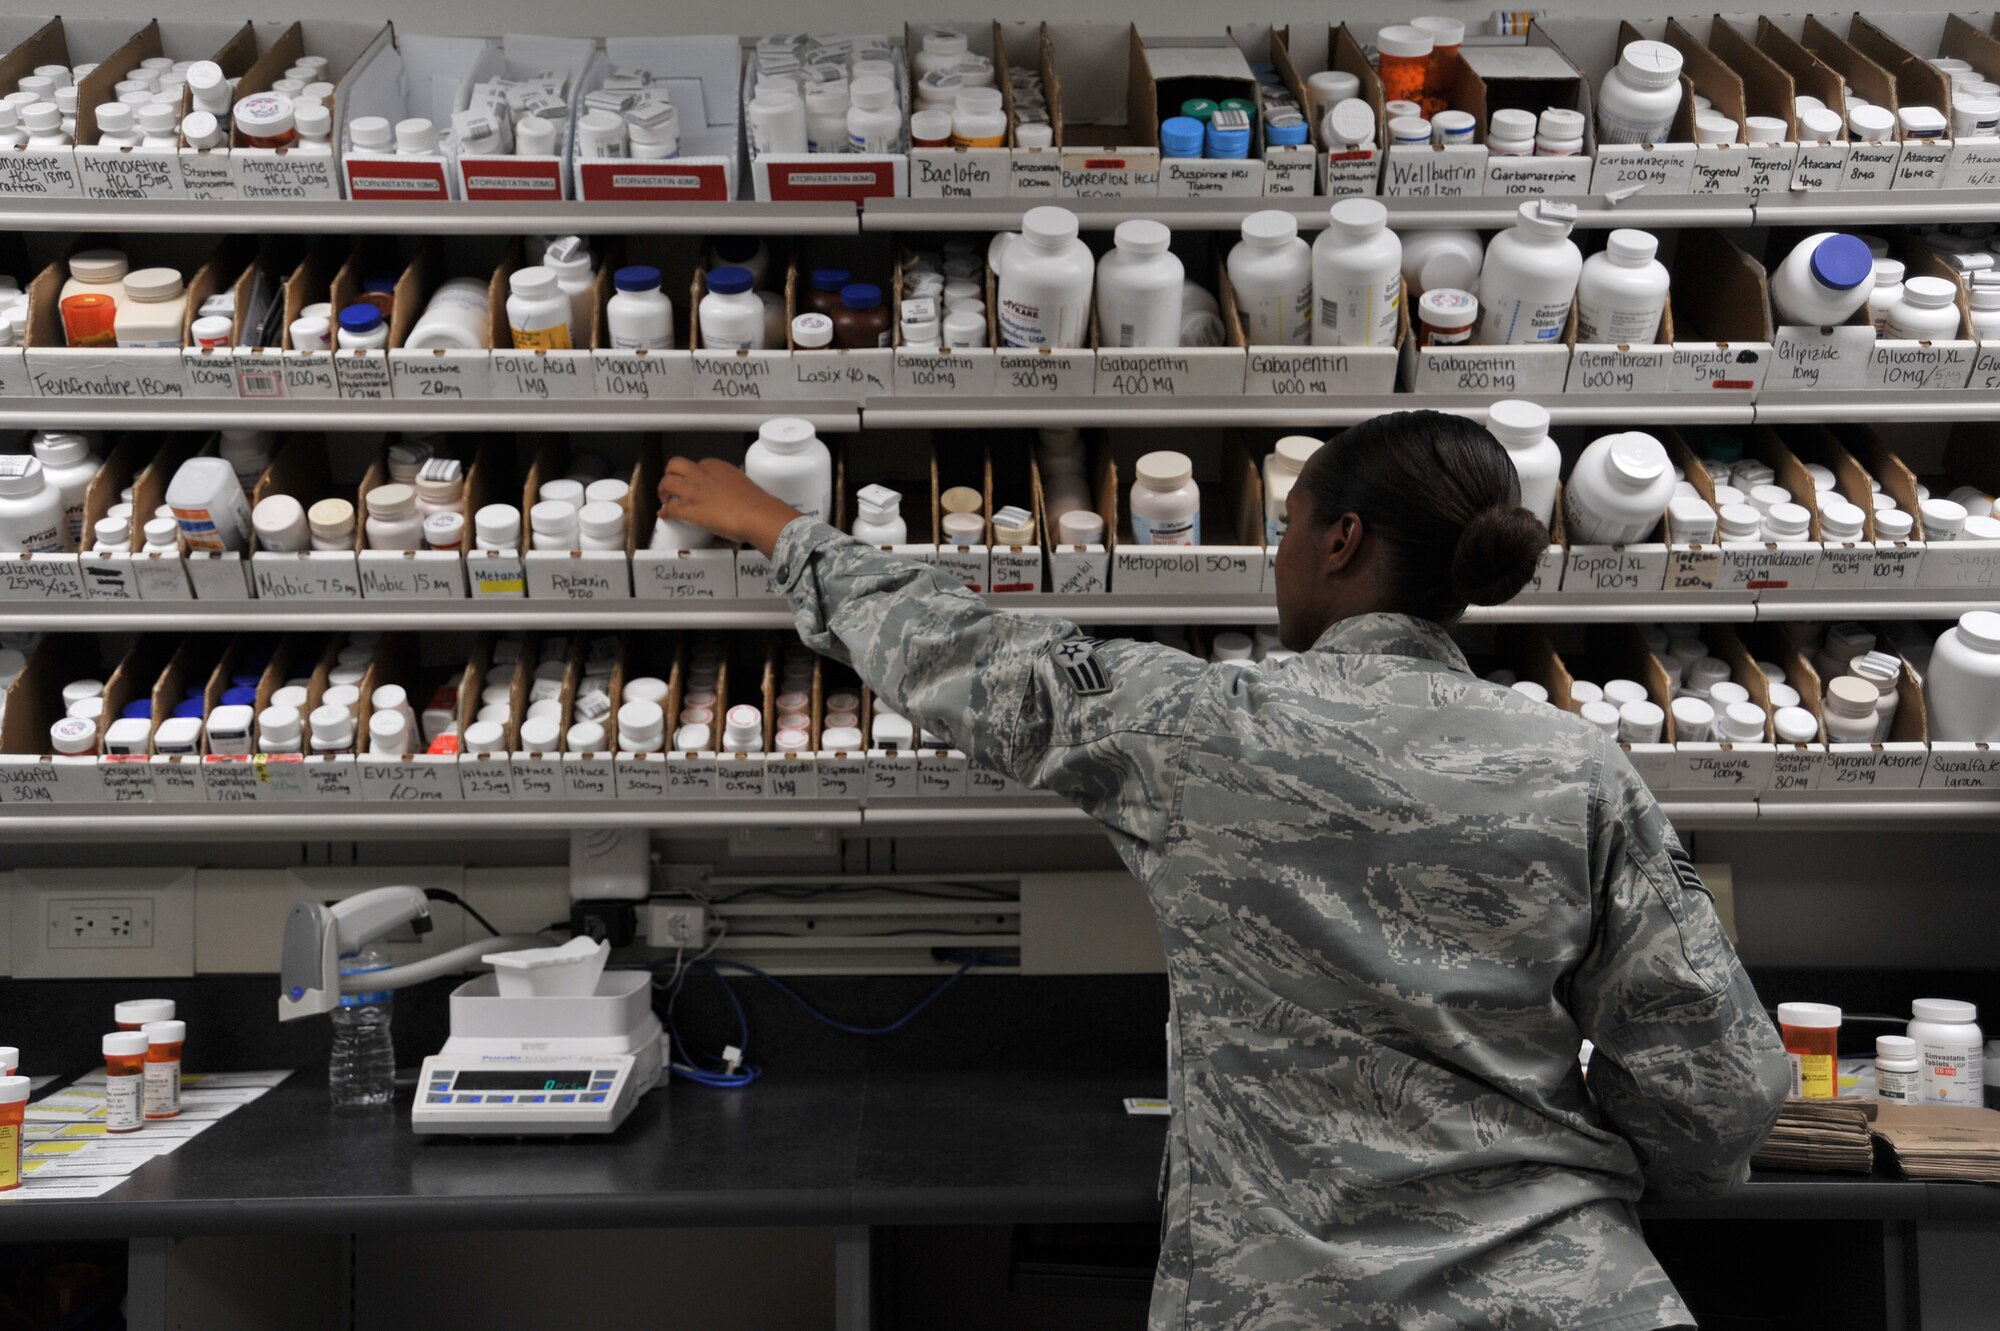 Senior Airman Lesley Perry, pharmacy technician, fills prescriptions at Maxwell Air Force Base, Nov. 6. During the medical group’s recent inspection, the pharmacy was instrumental in the group receiving a rating of excellent, with the pharmacy earning a perfect score with no findings. (U.S. Air Force photo by Staff Sgt. Natasha Stannard)